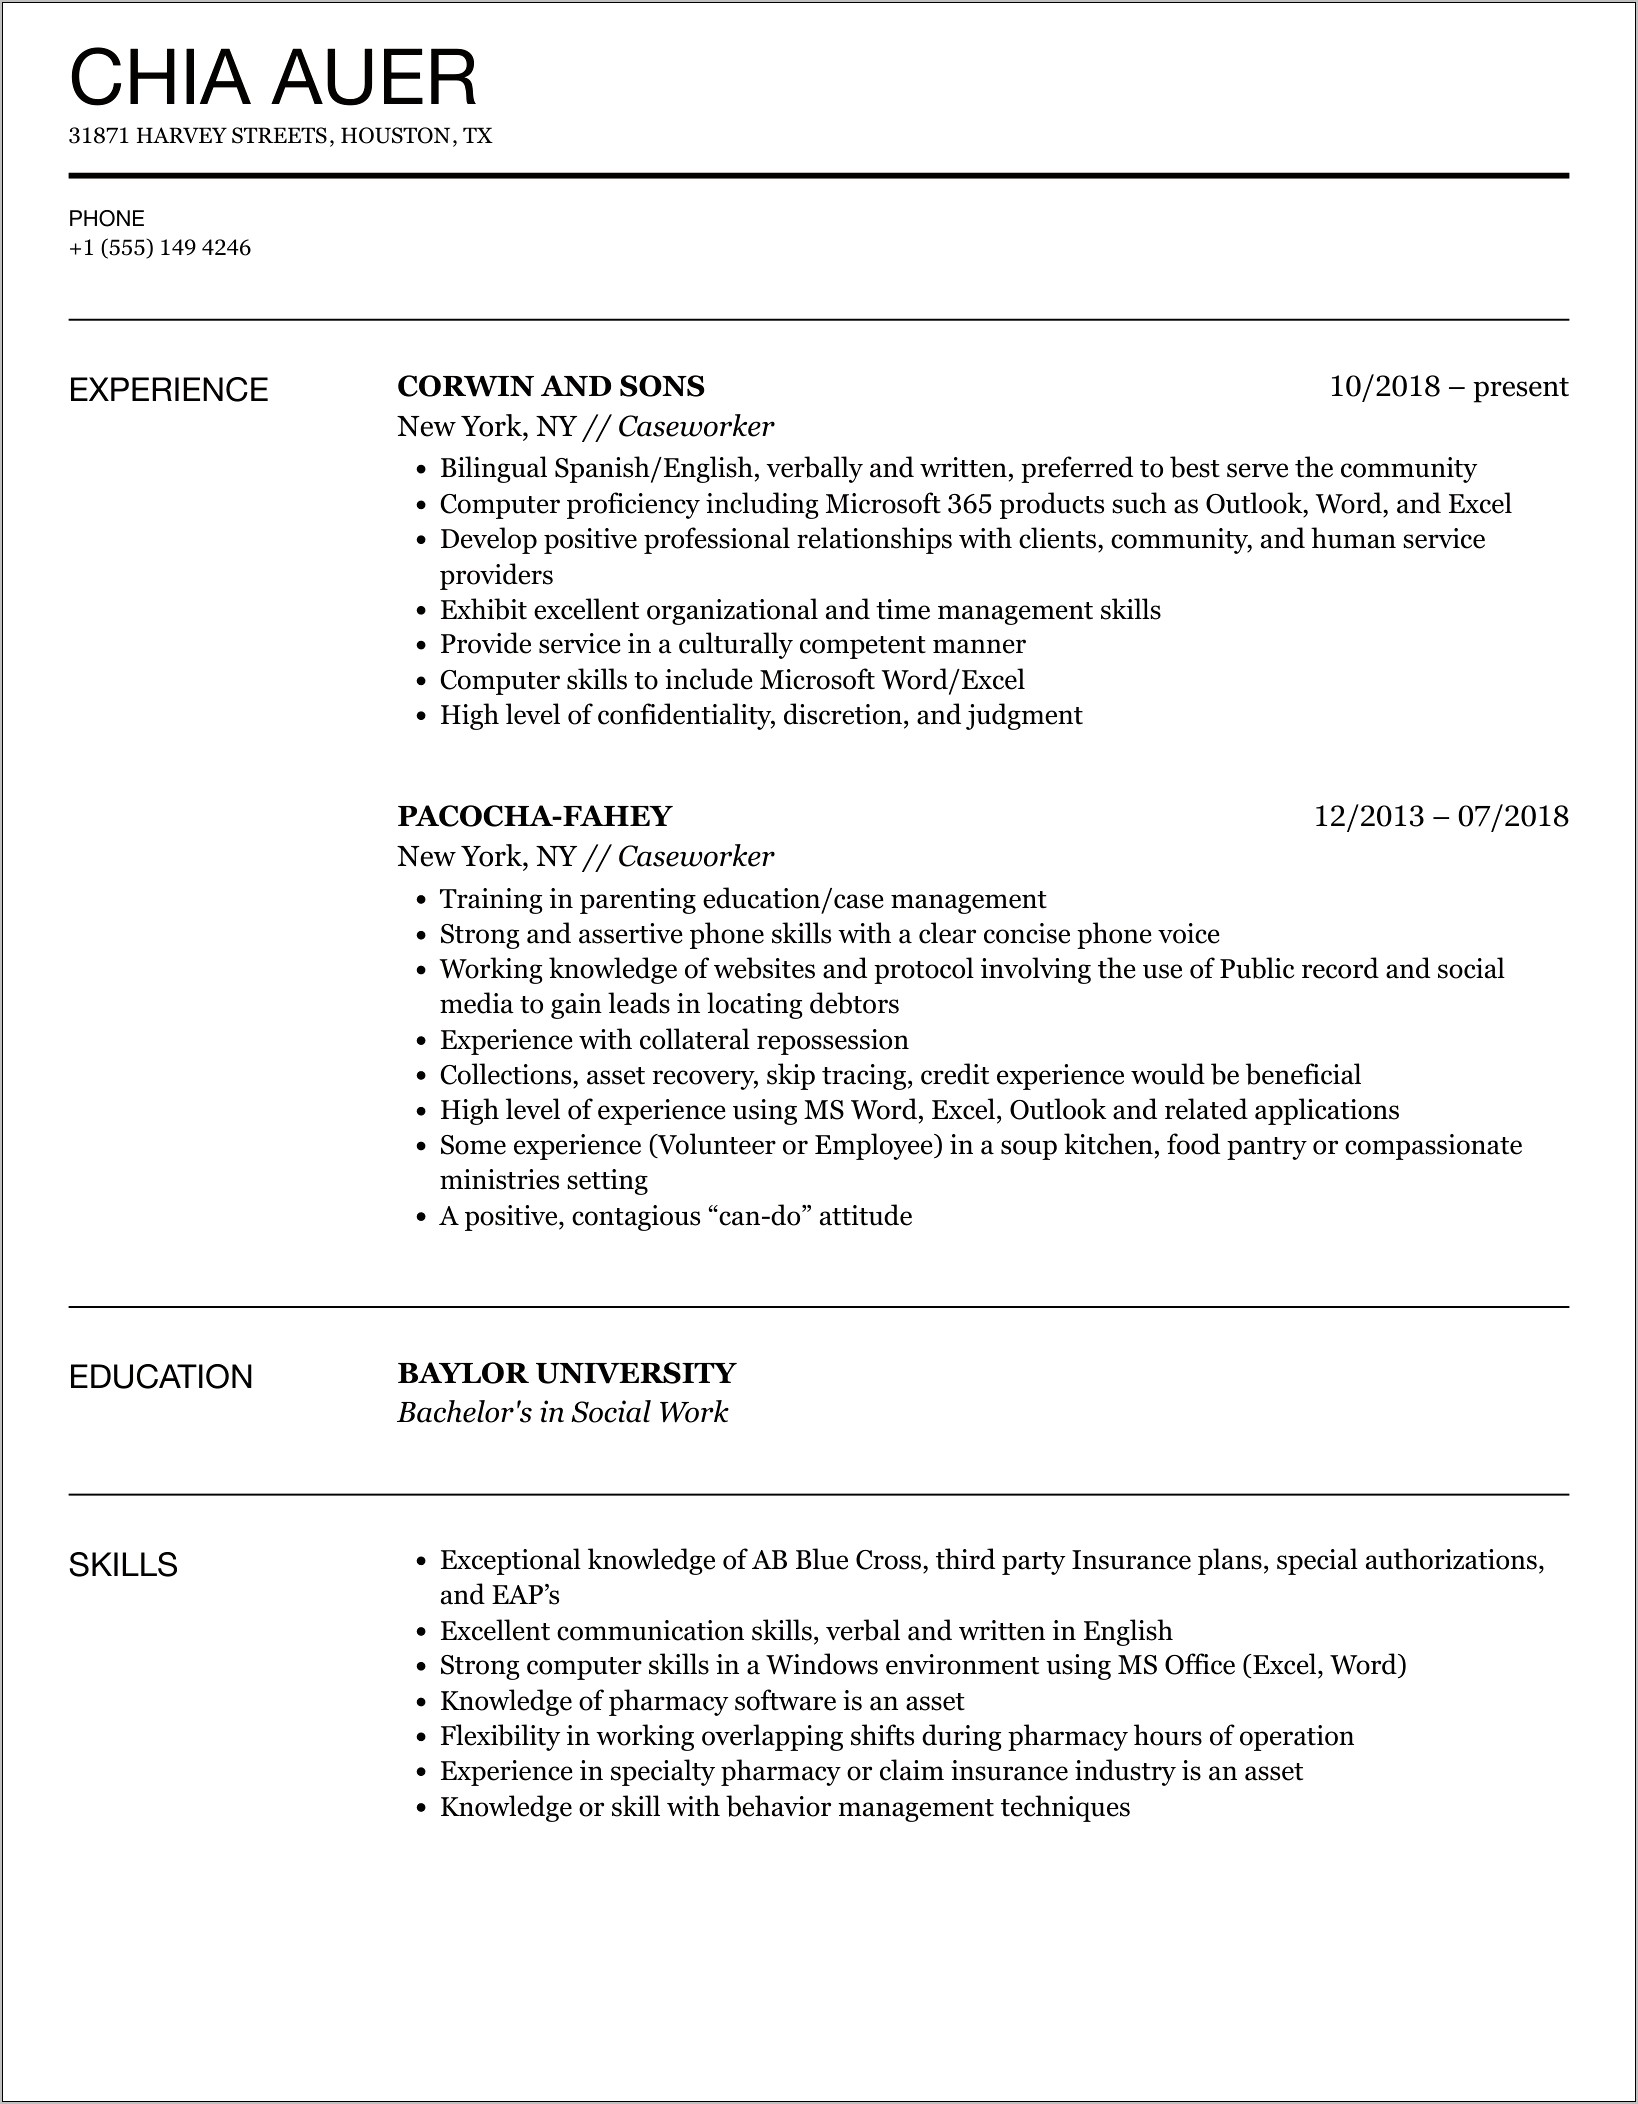 Human Services Worker Resume Objective